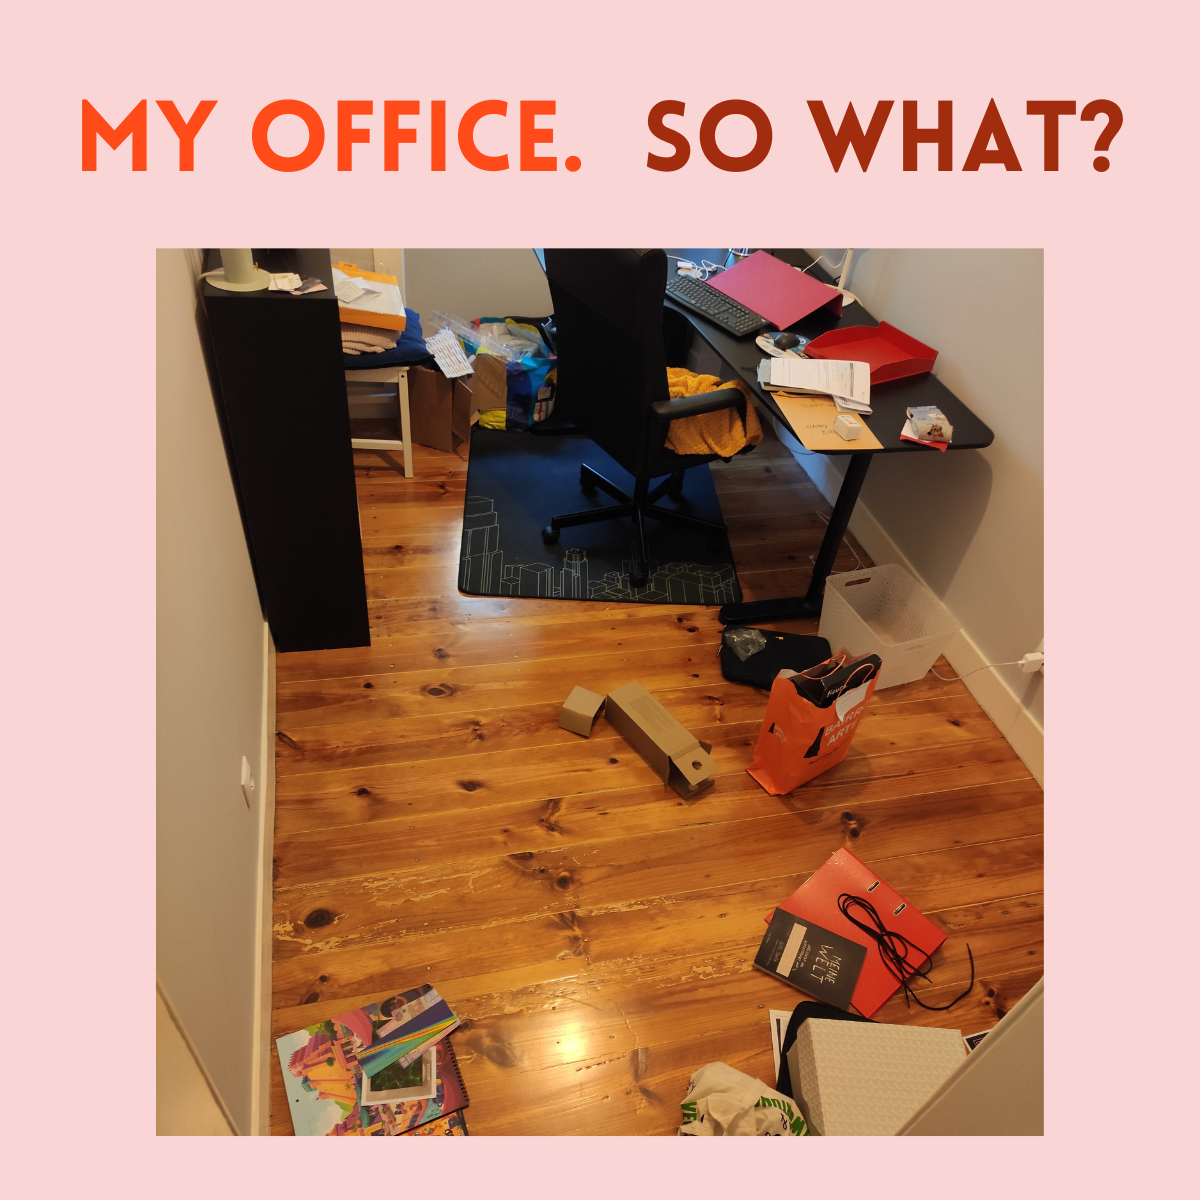 Bird's eye view of messy office. Different piles of papers, boxes, etc. in various corners of the floor, some on the desk as well